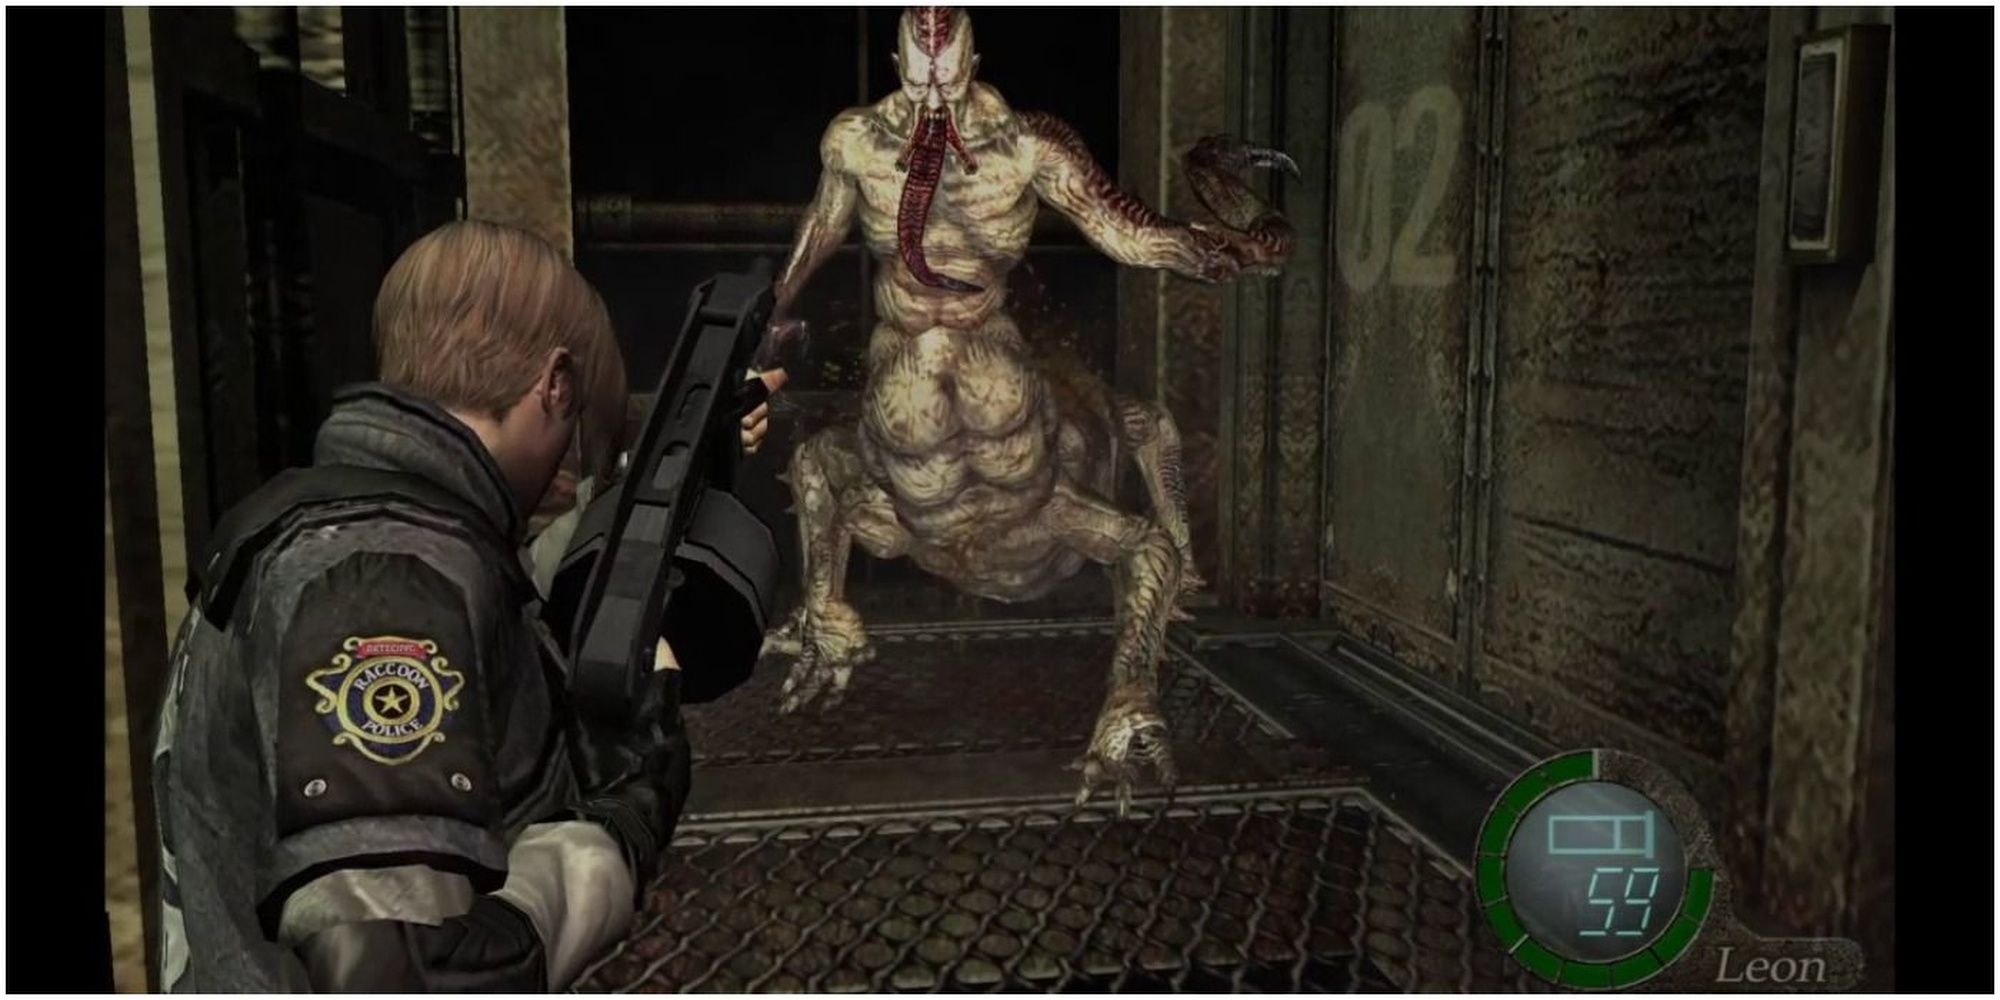 U3 attacking Leon in Resident Evil 4 Cropped